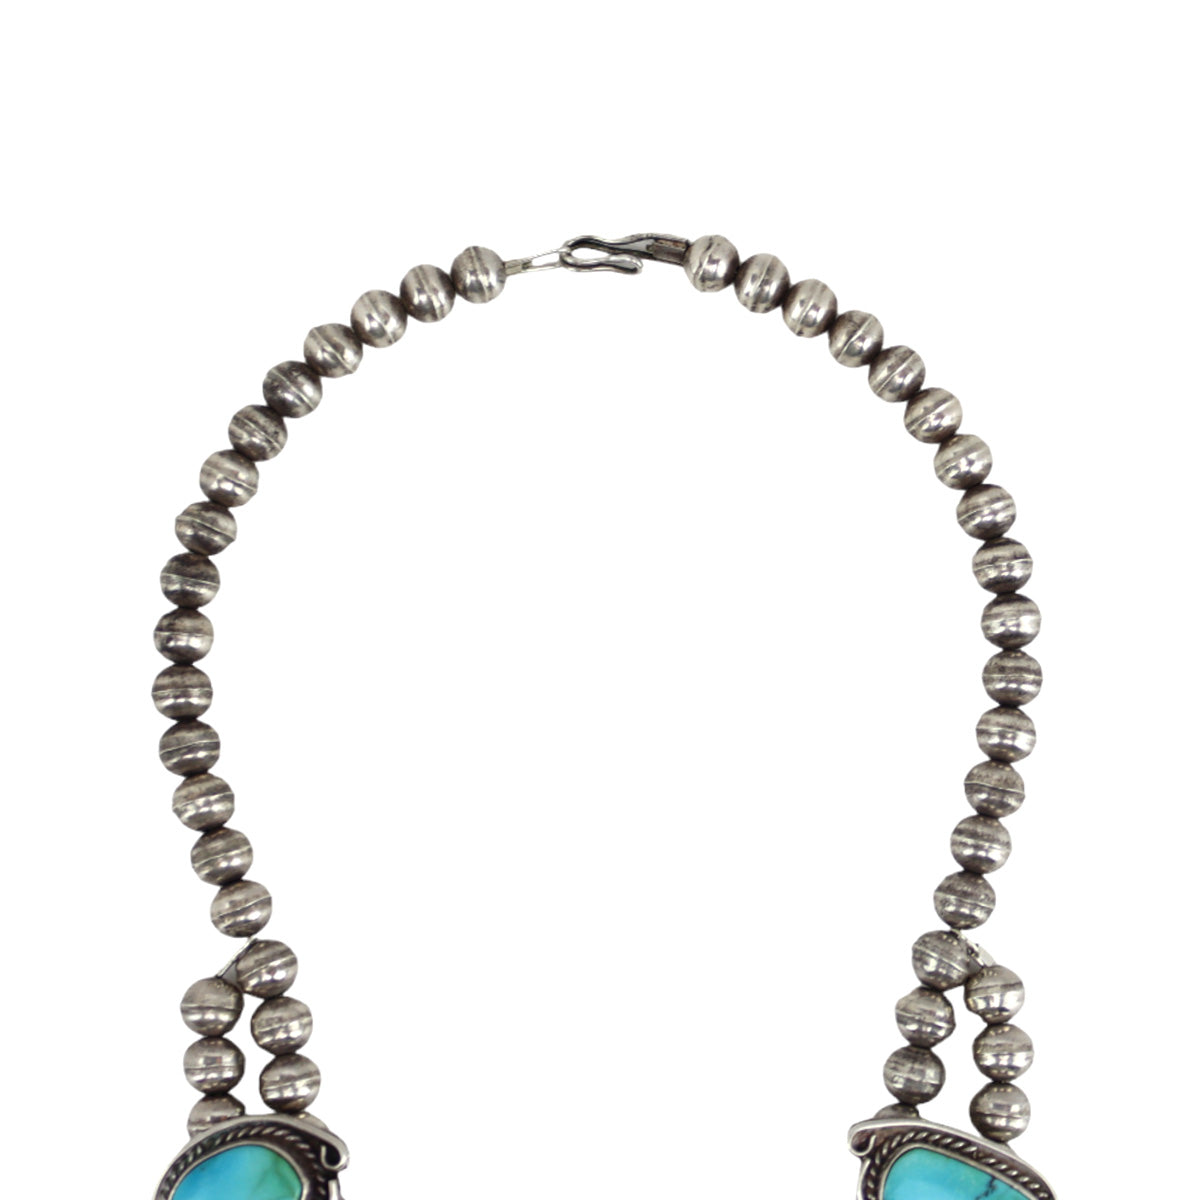 Navajo - Turquoise and Silver Squash Blossom Necklace c. 1960-70s, 25" length (J91343C-1223-001)